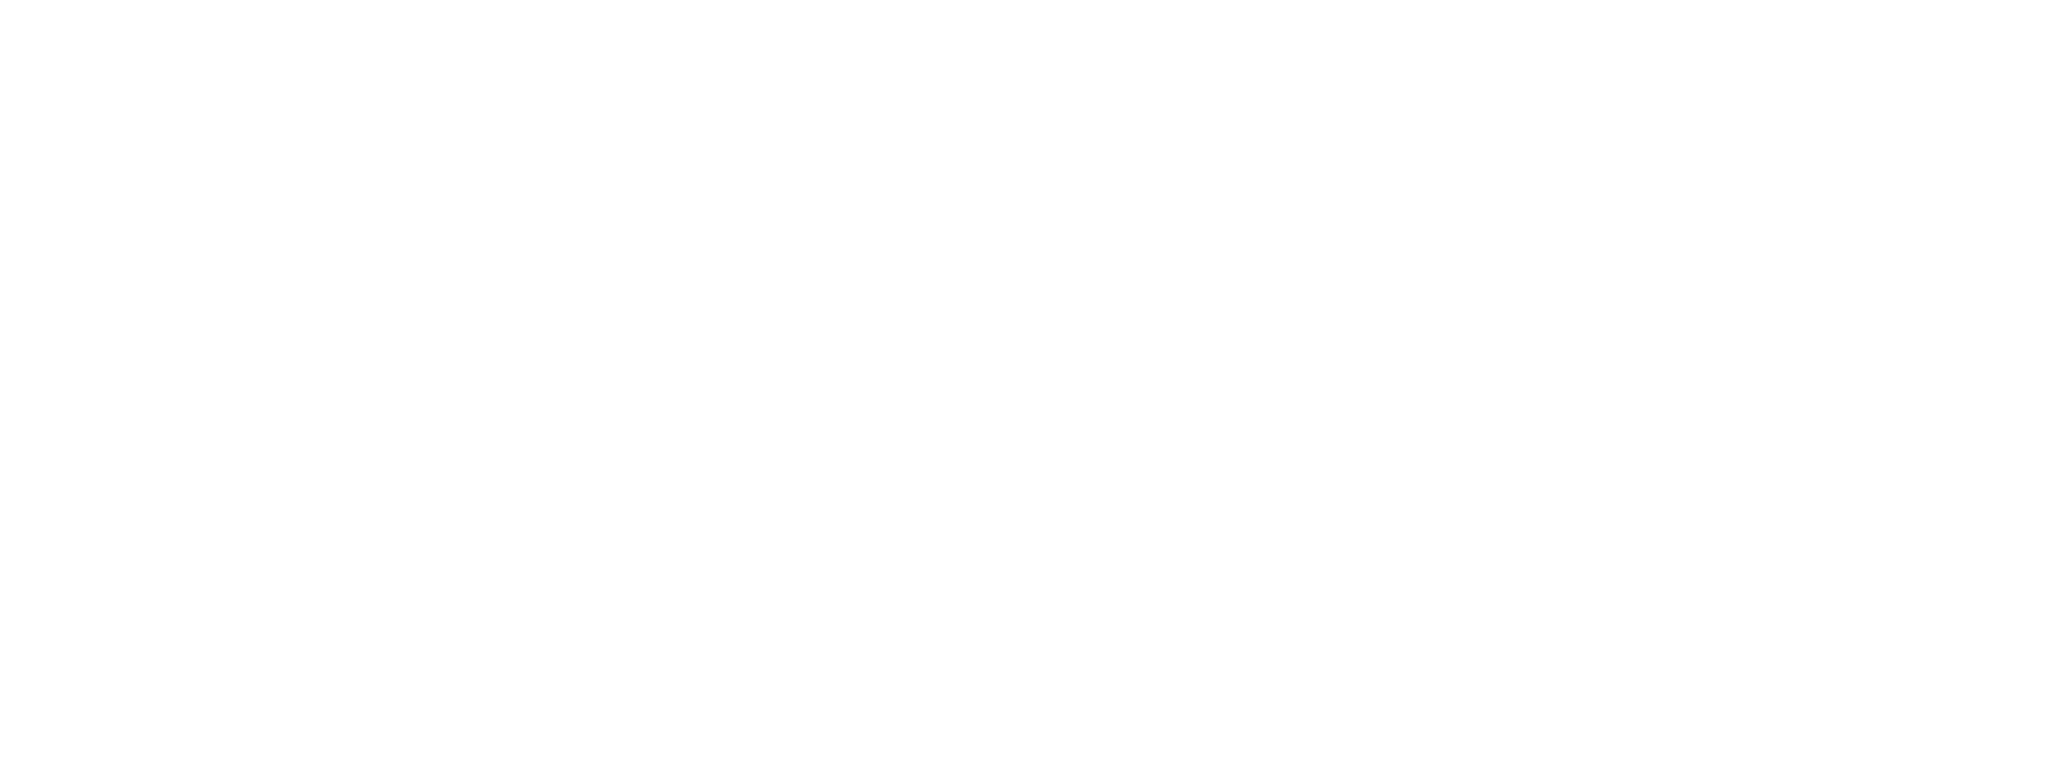 With Name (black And White) Centennial (black And White) - Mortar Board (2096x788)